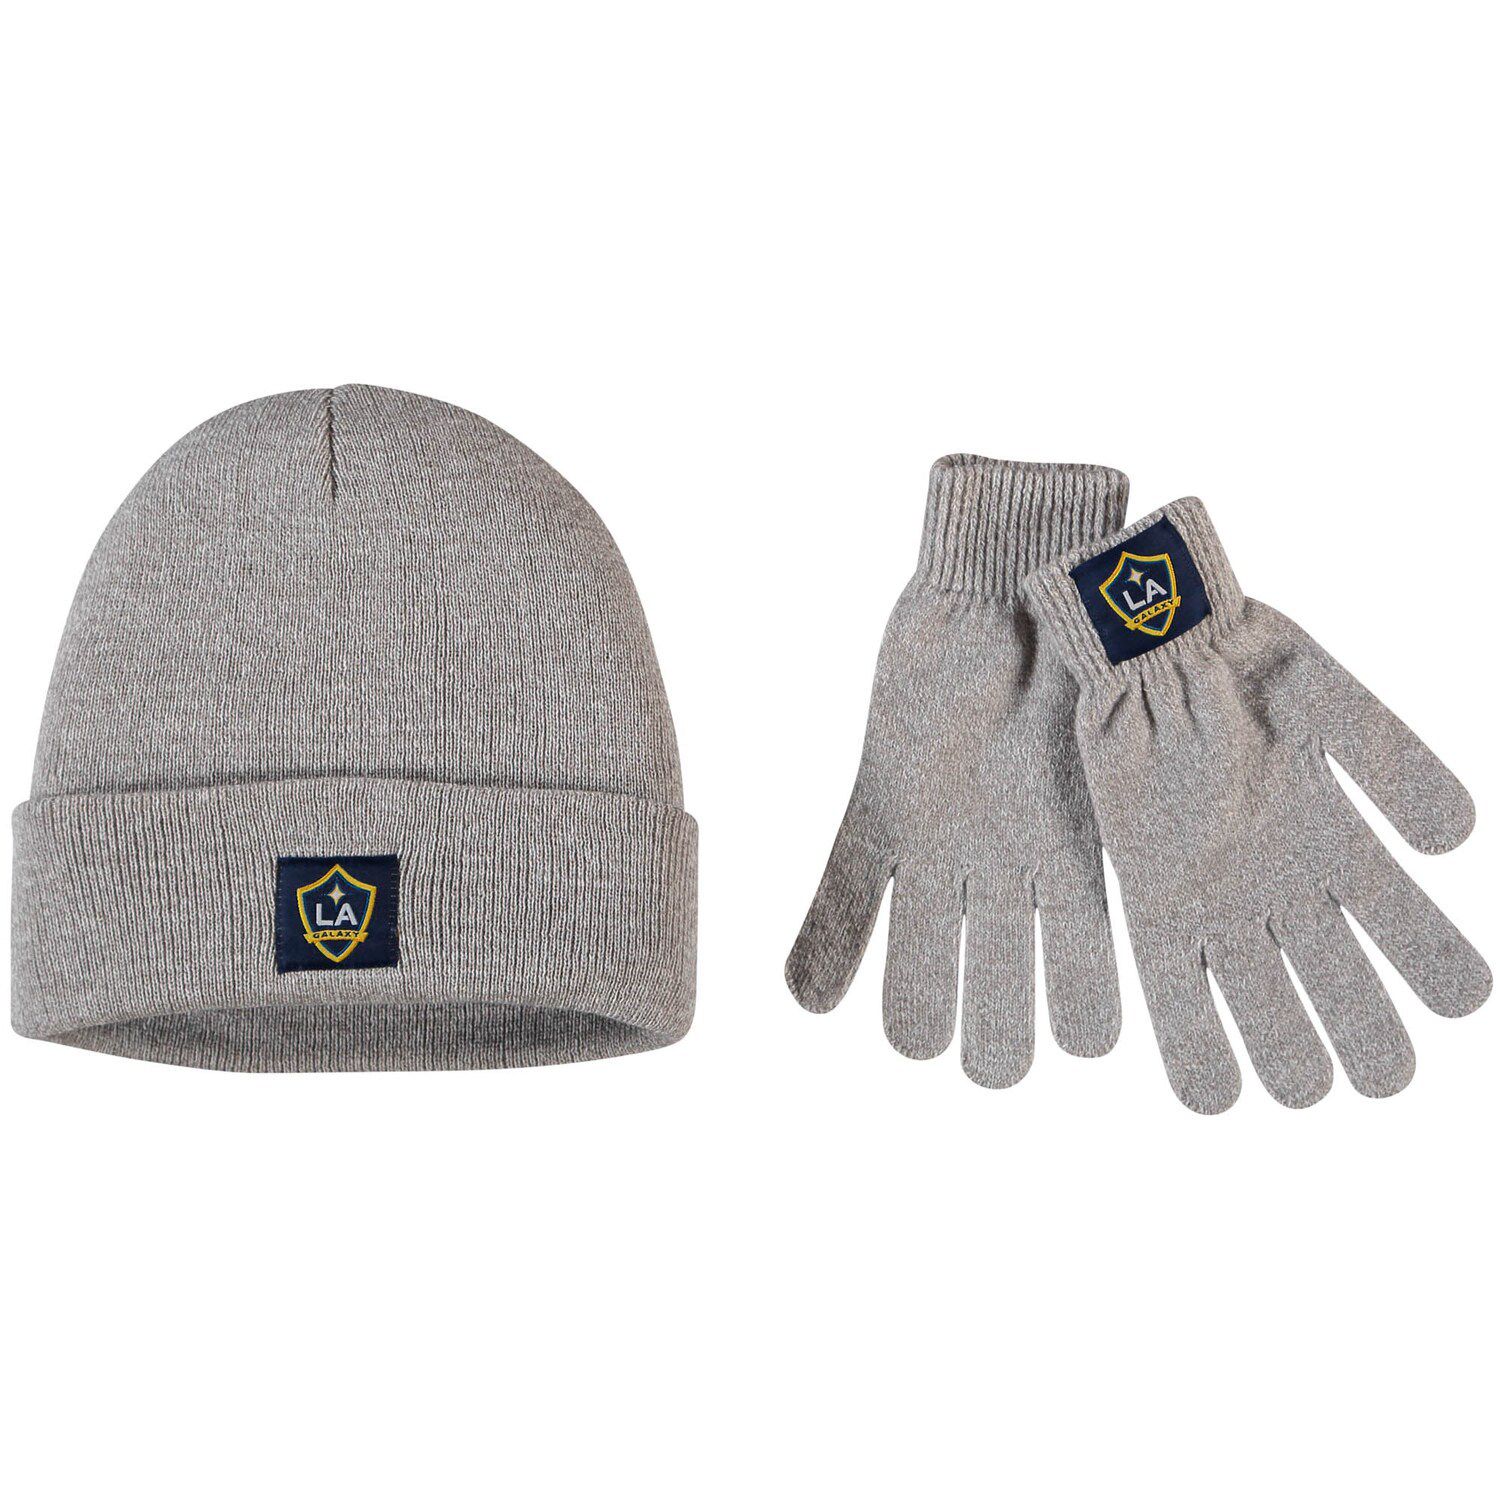 Image for Unbranded Women's ZooZatz Heathered Gray LA Galaxy Cuffed Knit Hat & Gloves Set at Kohl's.